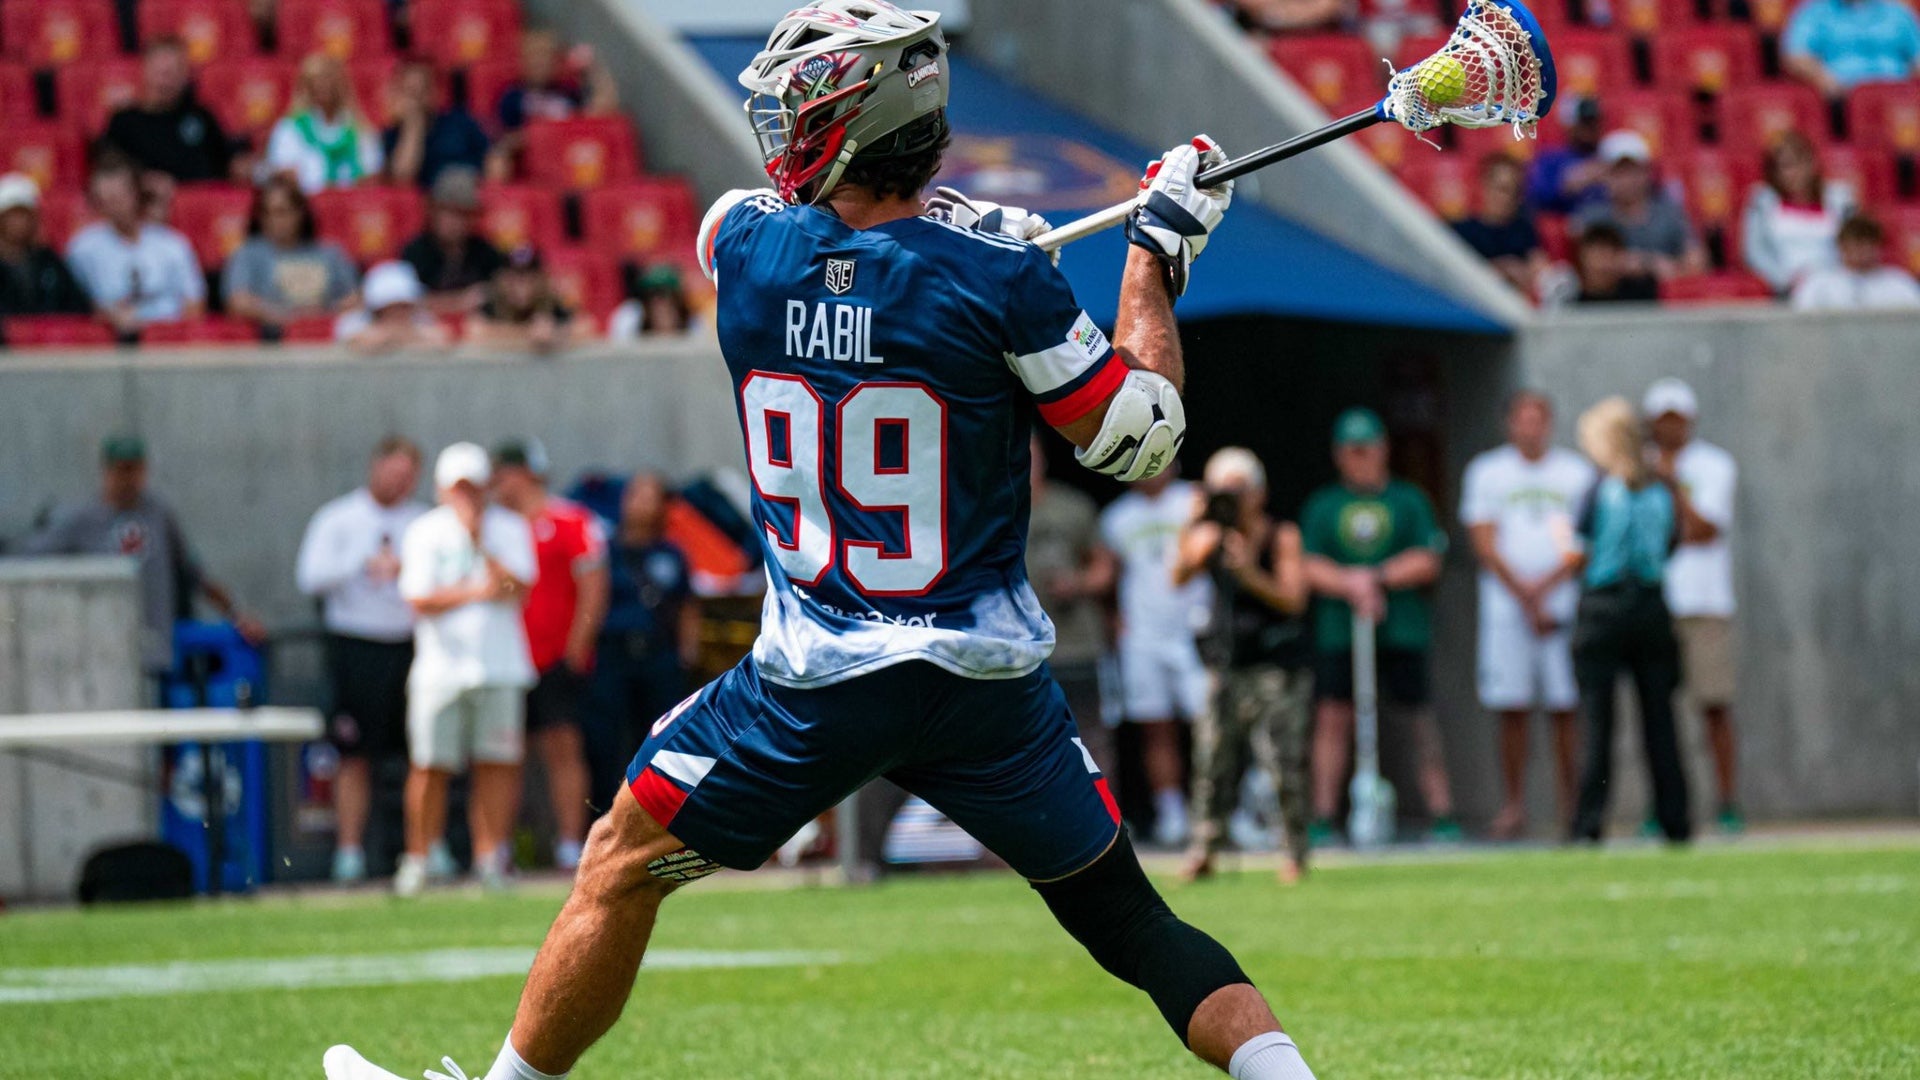 6 Takeaways from Paul Rabil's Overtime Podcast Appearance